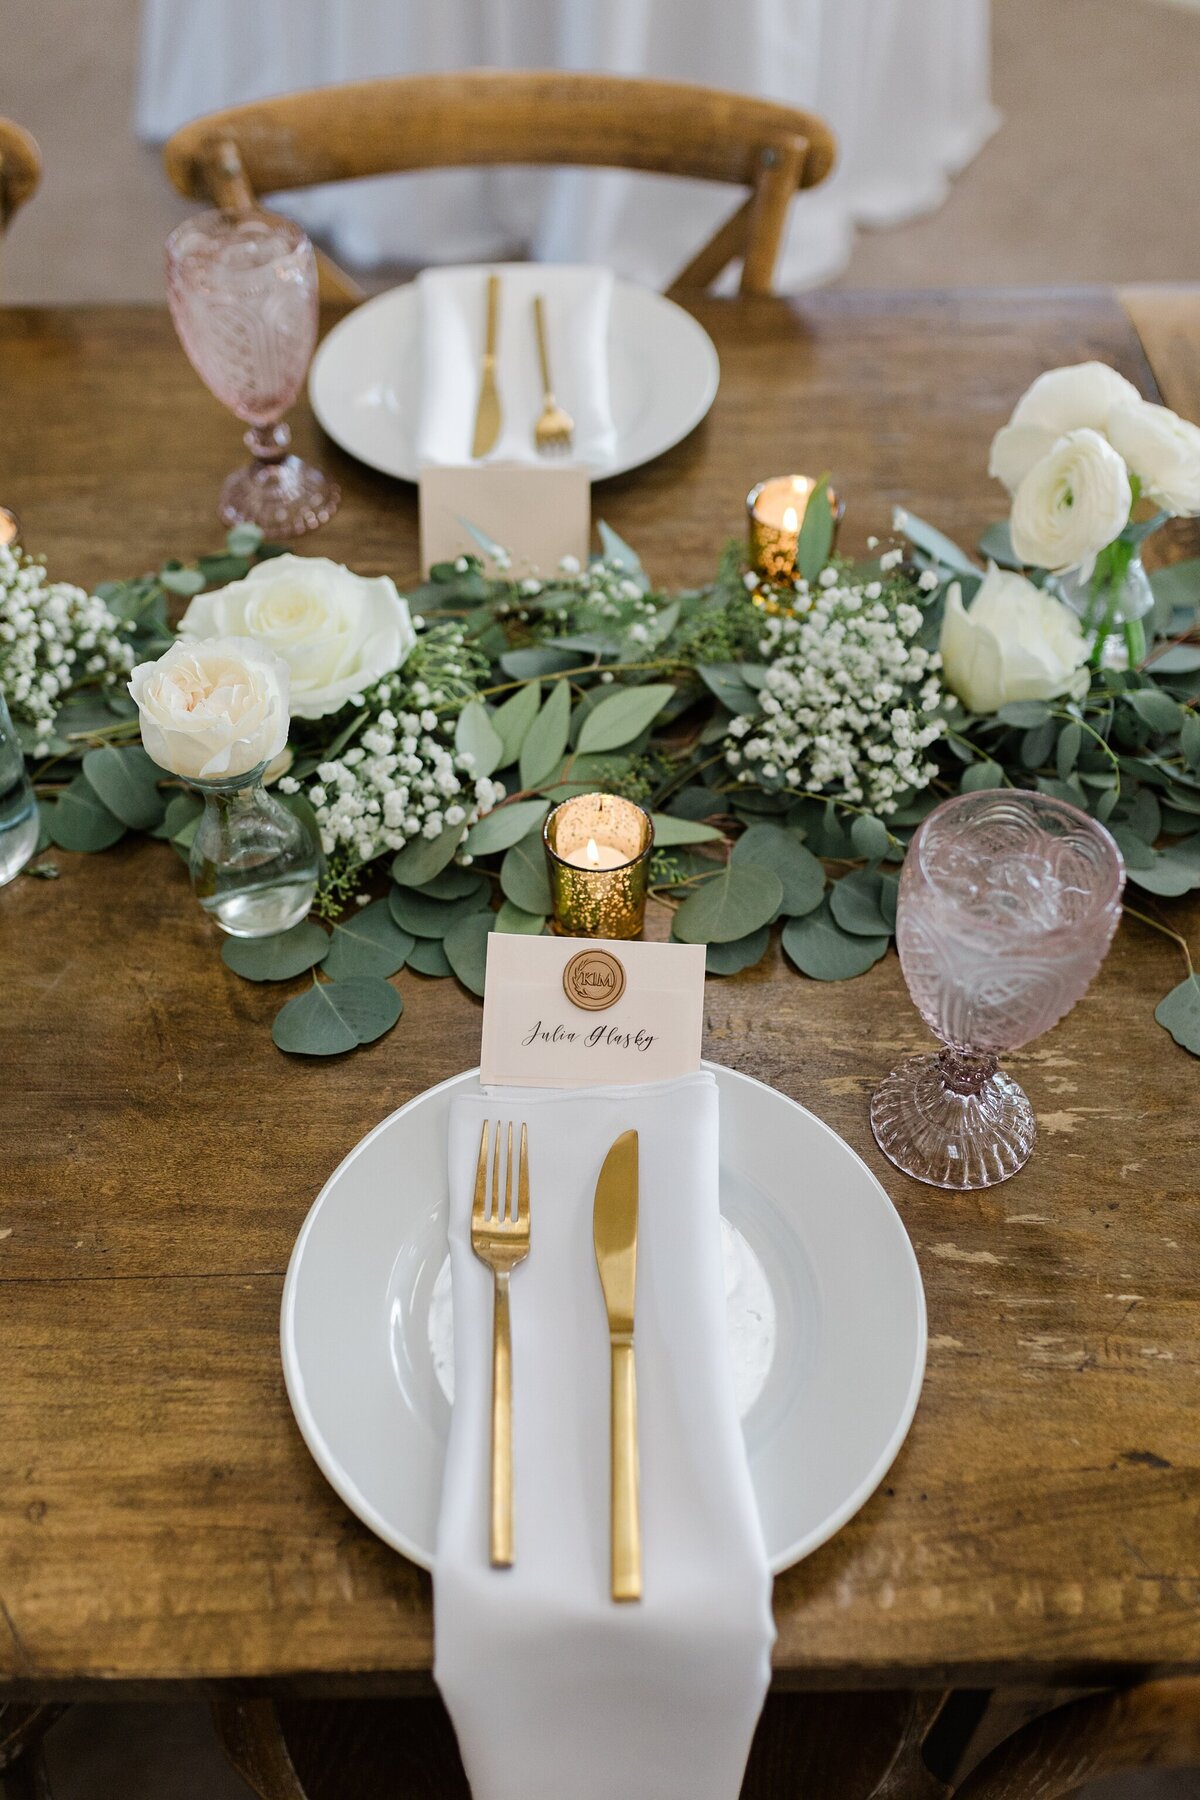 A detail shot of a place setting for a wedding reception at Bella Cavalli Events in Aubrey, Texas. The place setting is made up of a white plate, gold knife and fork, napkin, and a personalized name tag embossed with a wax seal. Behind it is a candle and a long floral arrangement extending to either side. An identical place setting can be seen on the opposite side of the table.